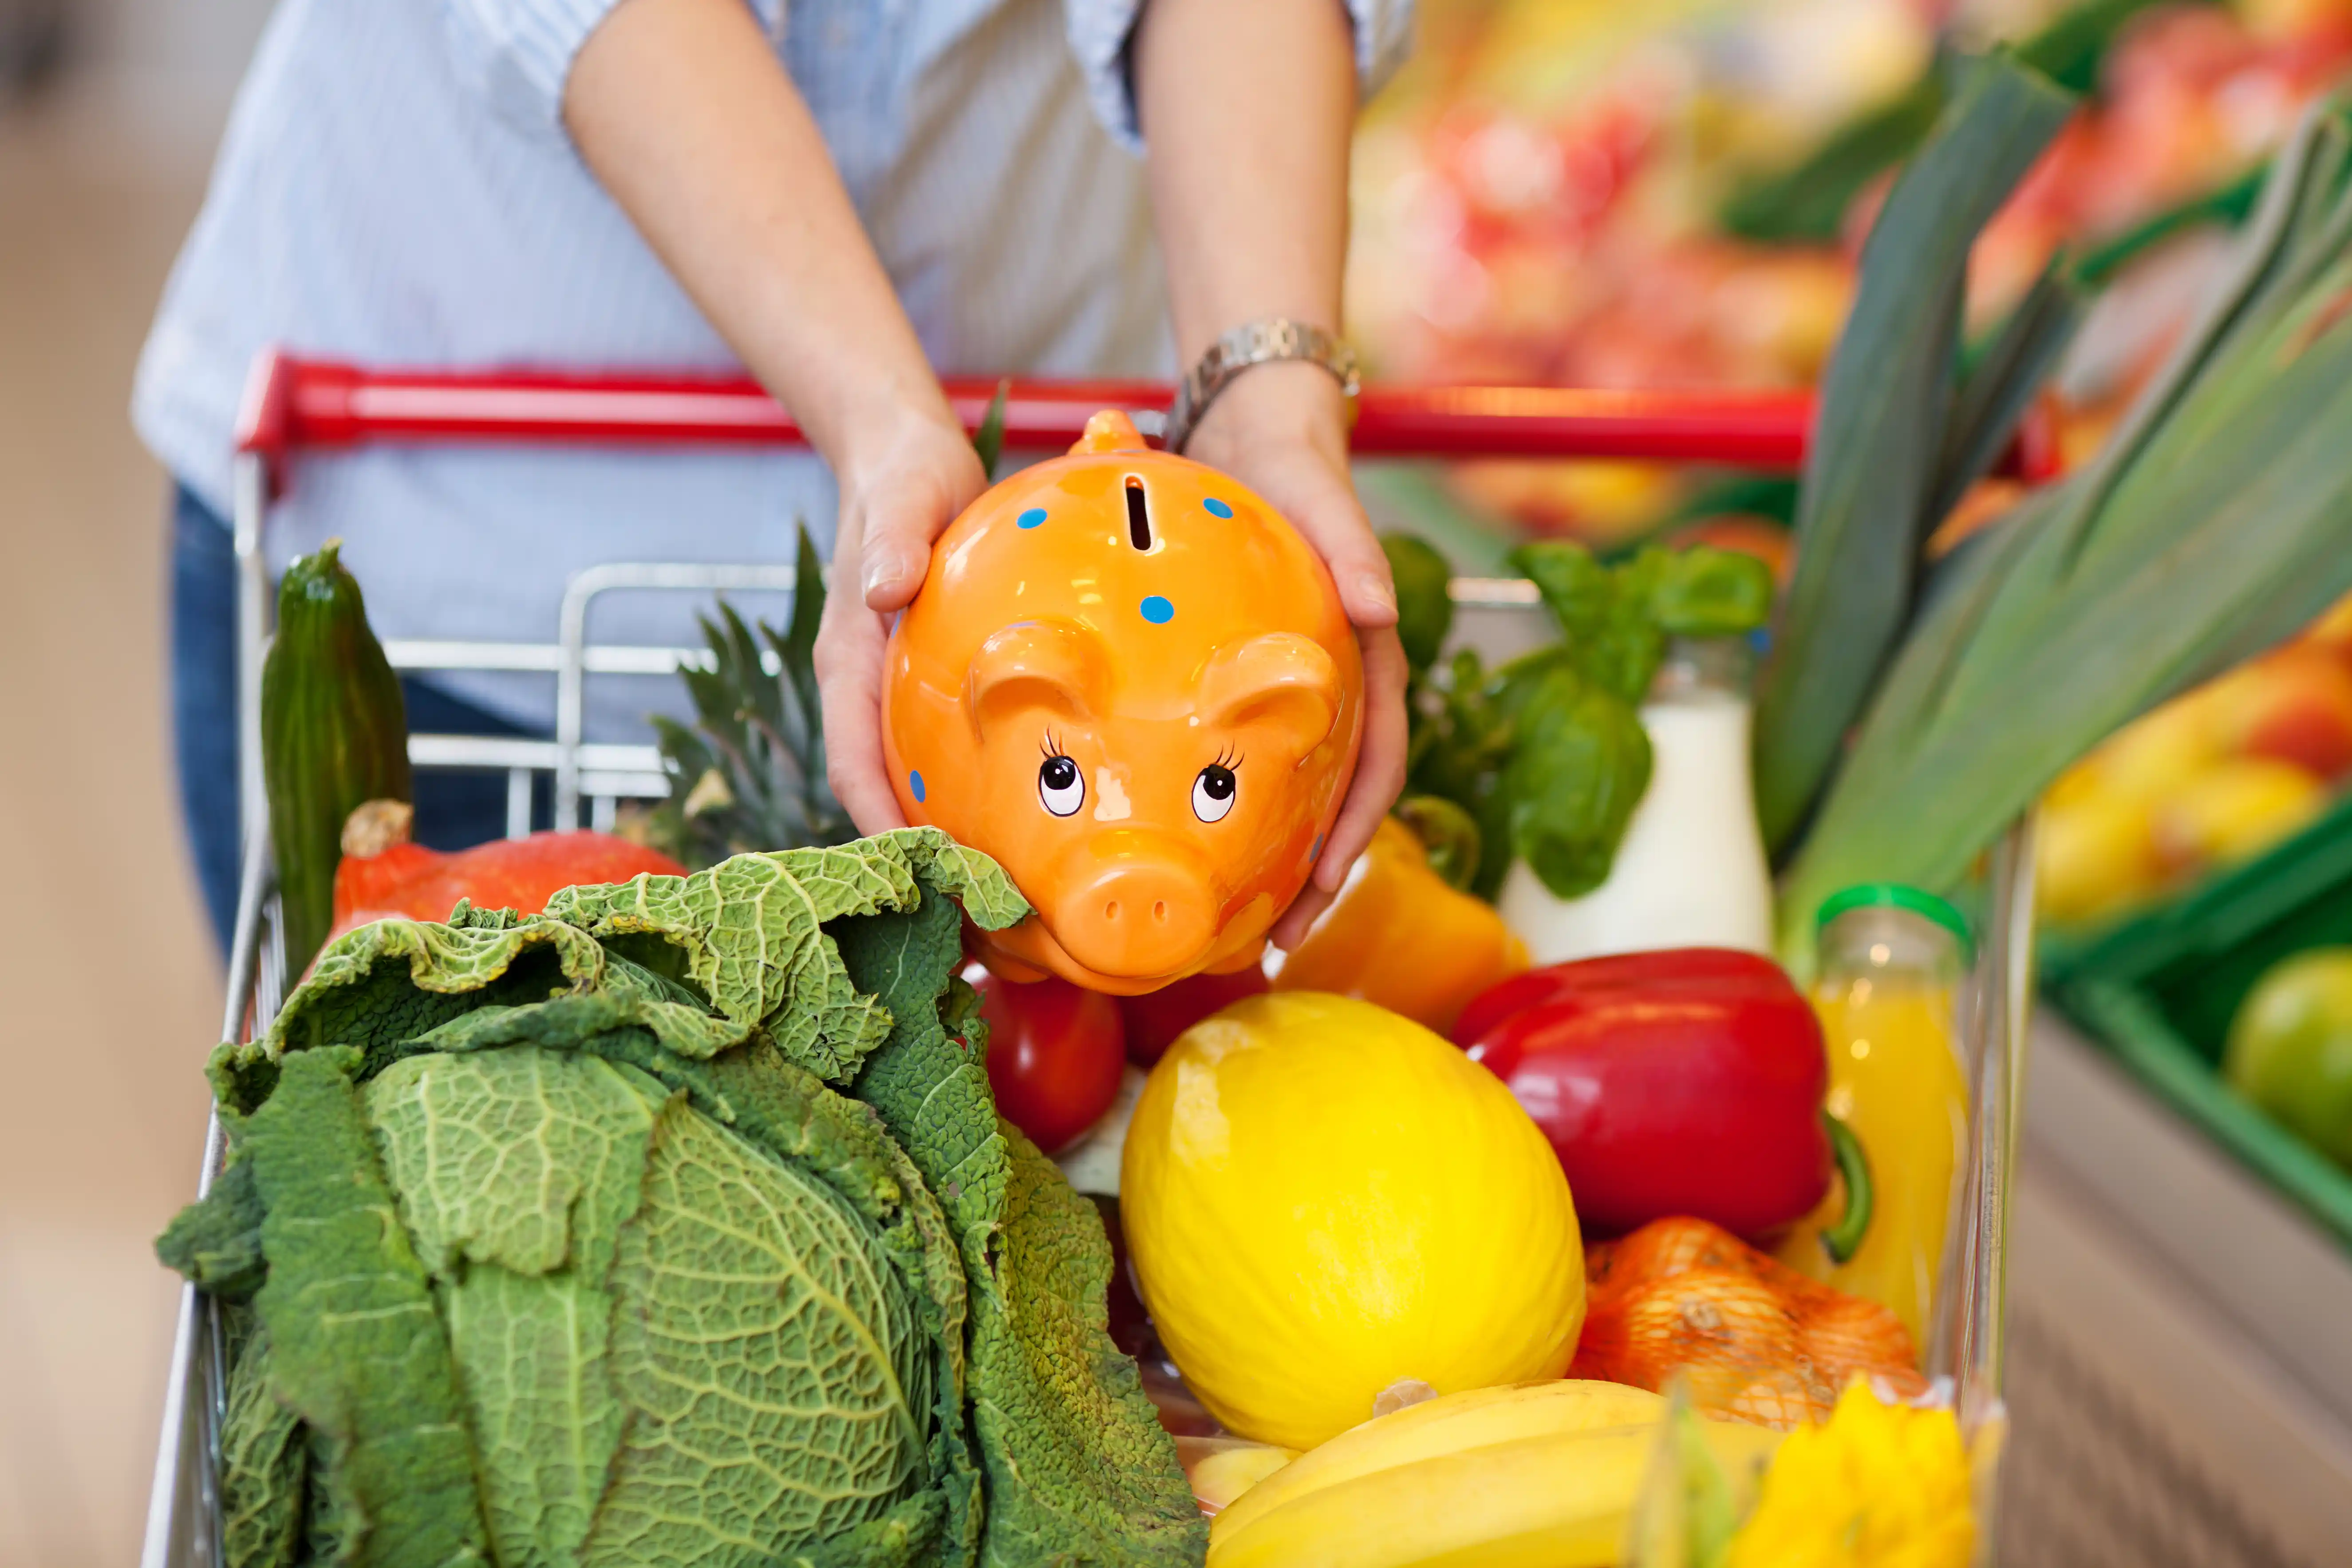 12 Smart Grocery Shopping Tips to Save on Food